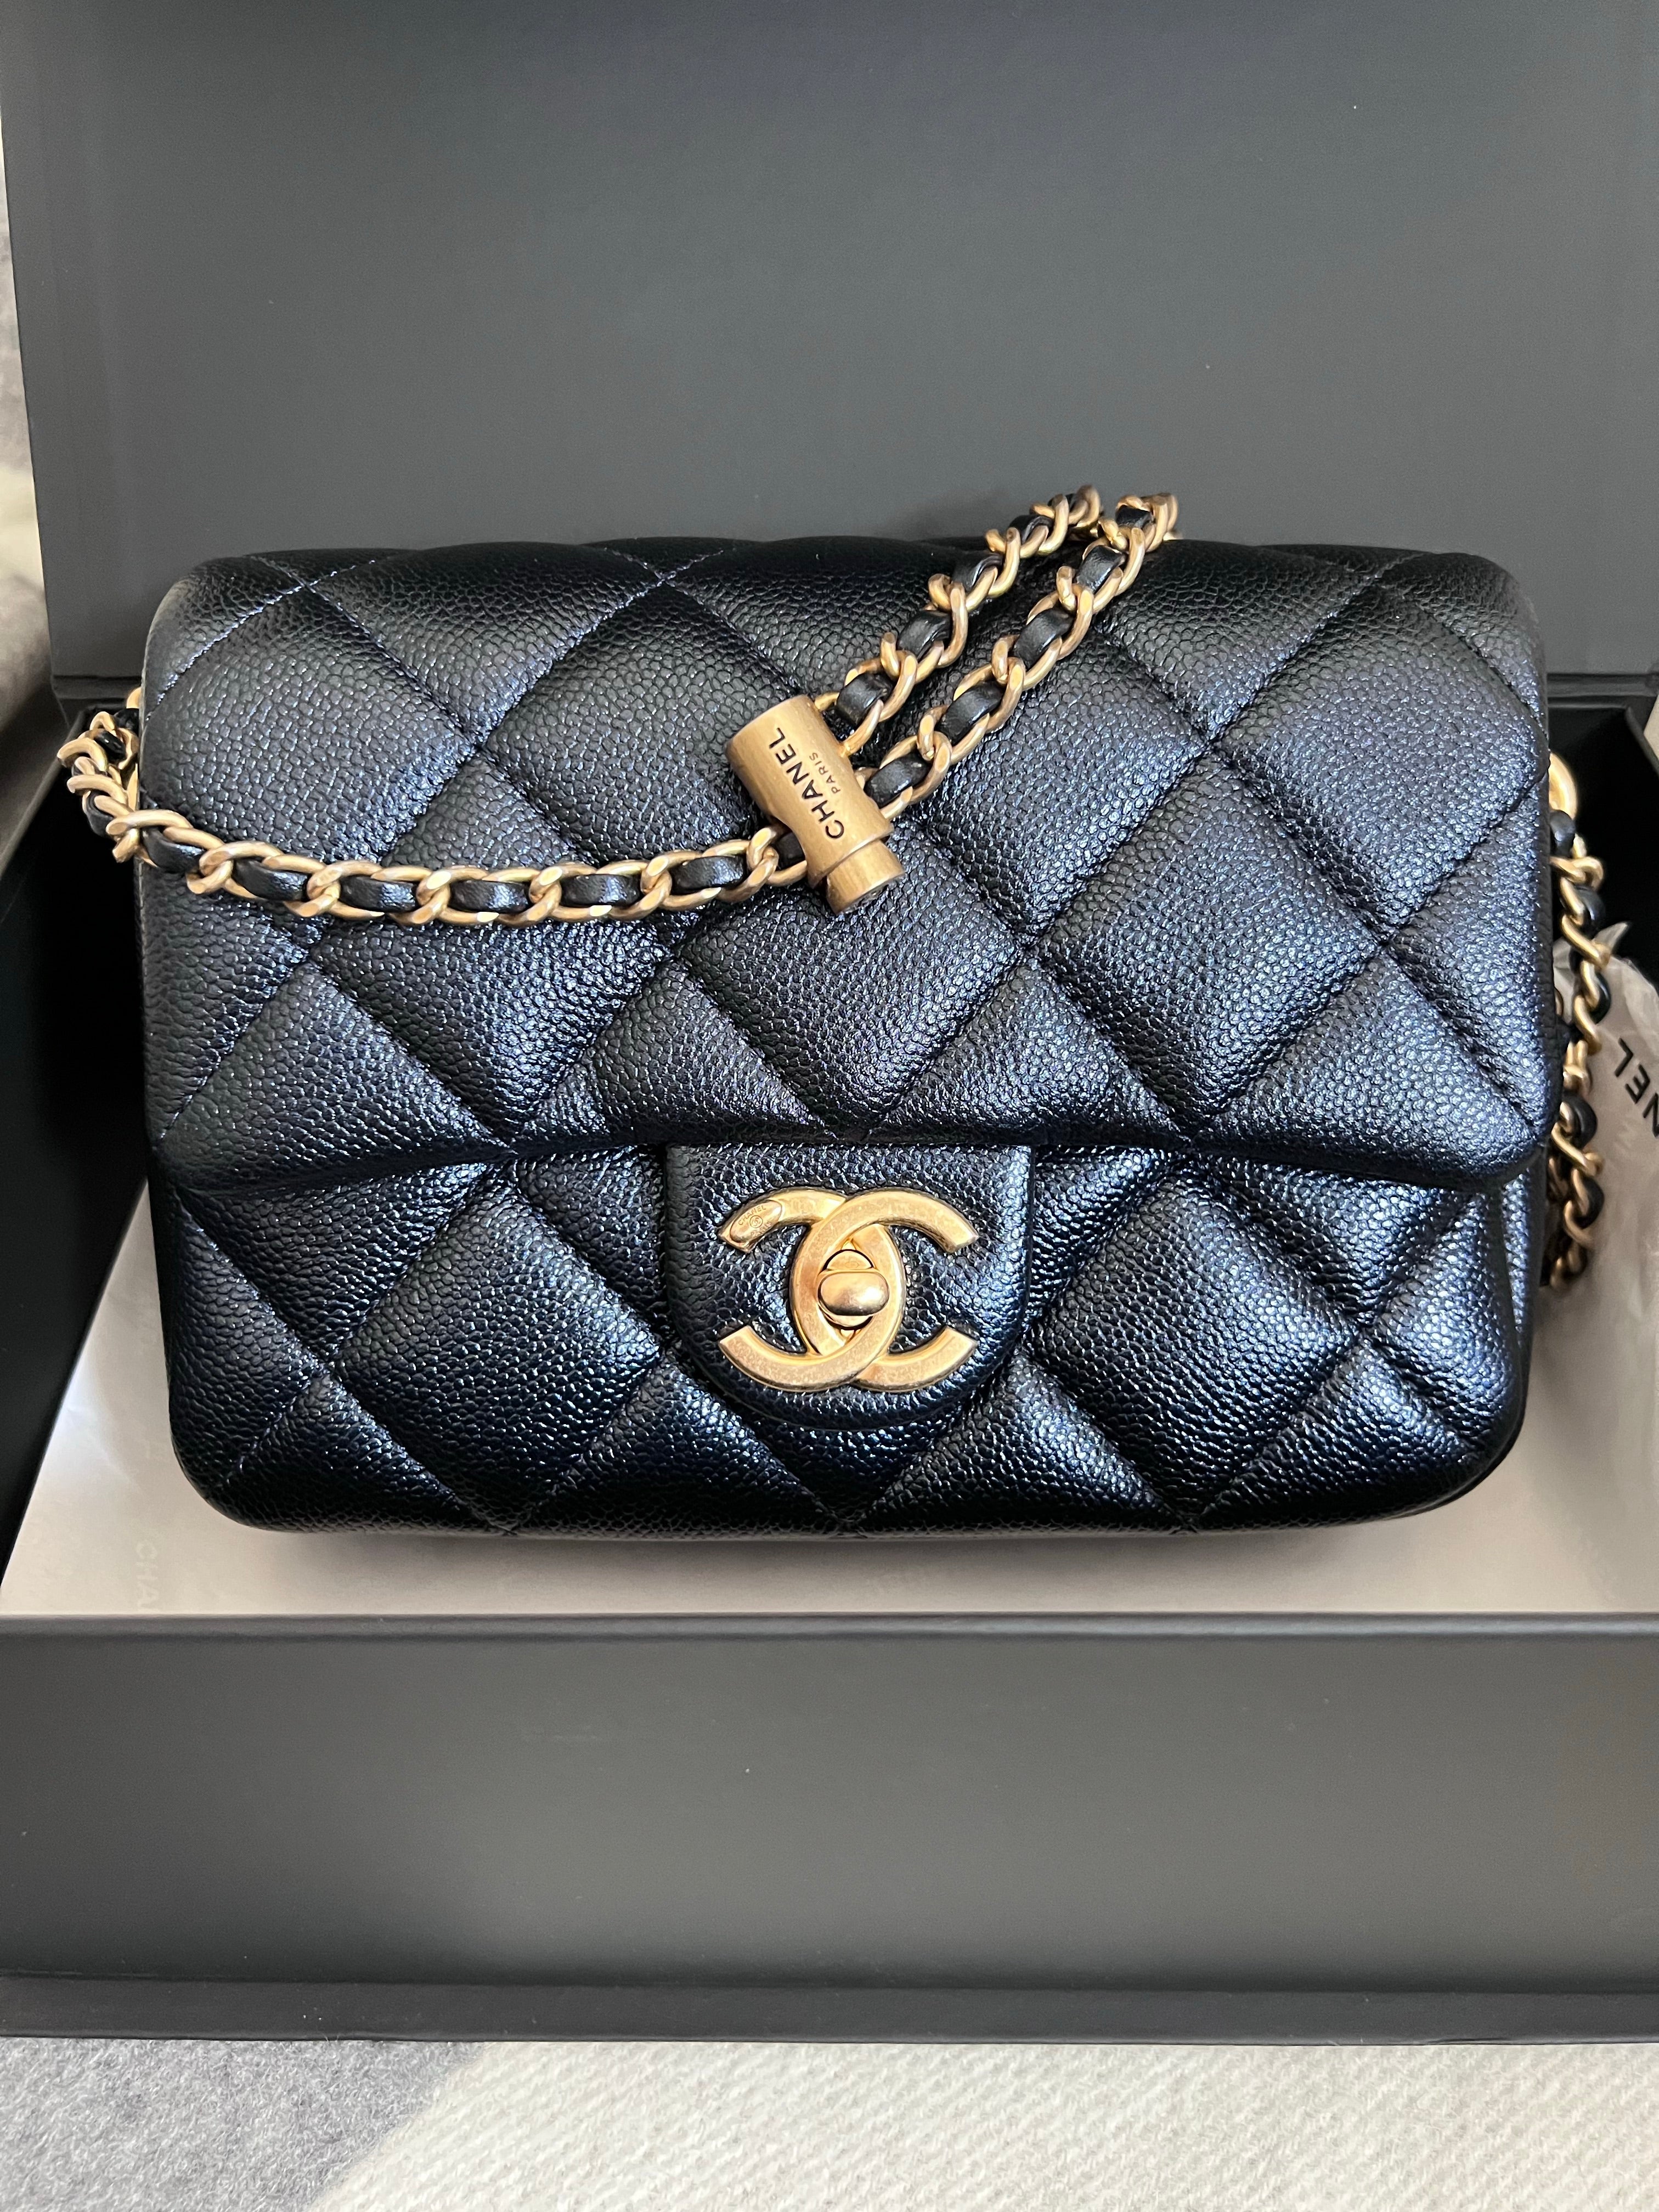 REVIEW] รีวิวกระเป๋า Chanel 21k My Perfect Bag Iridescent Black